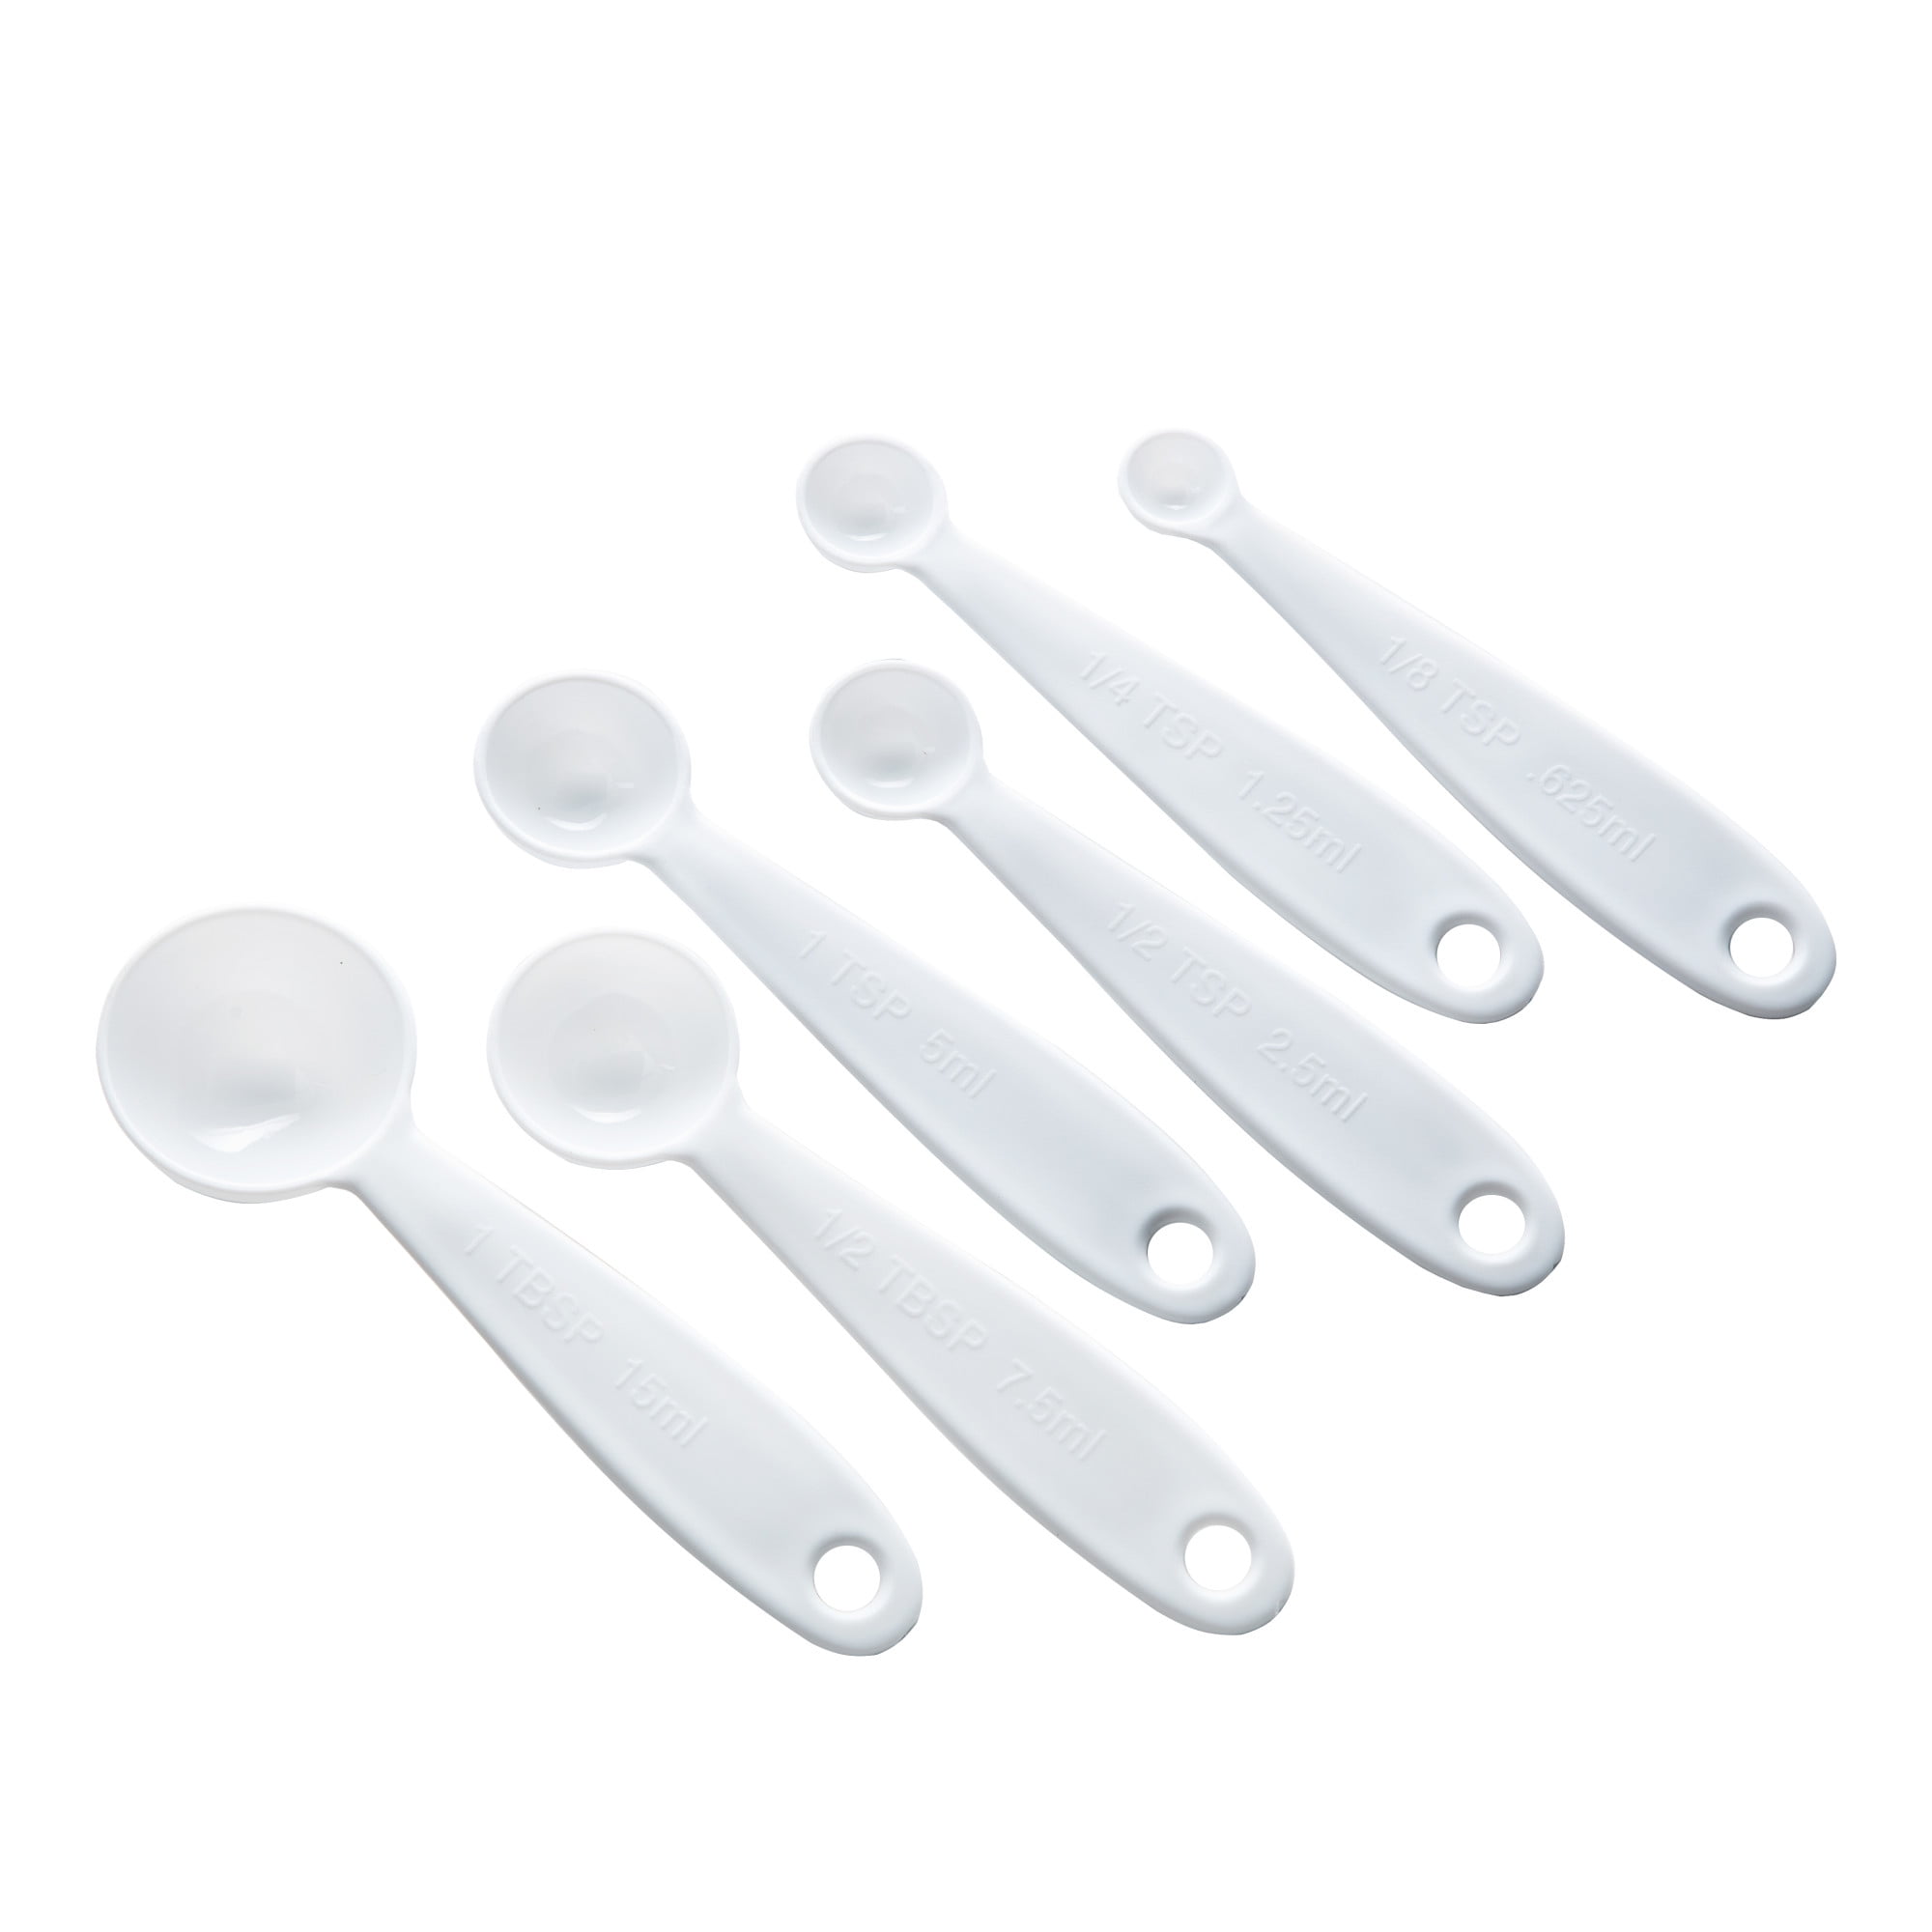 Set of 10 Disney (Hoan No. 406) Plastic Measuring Cups and Spoons